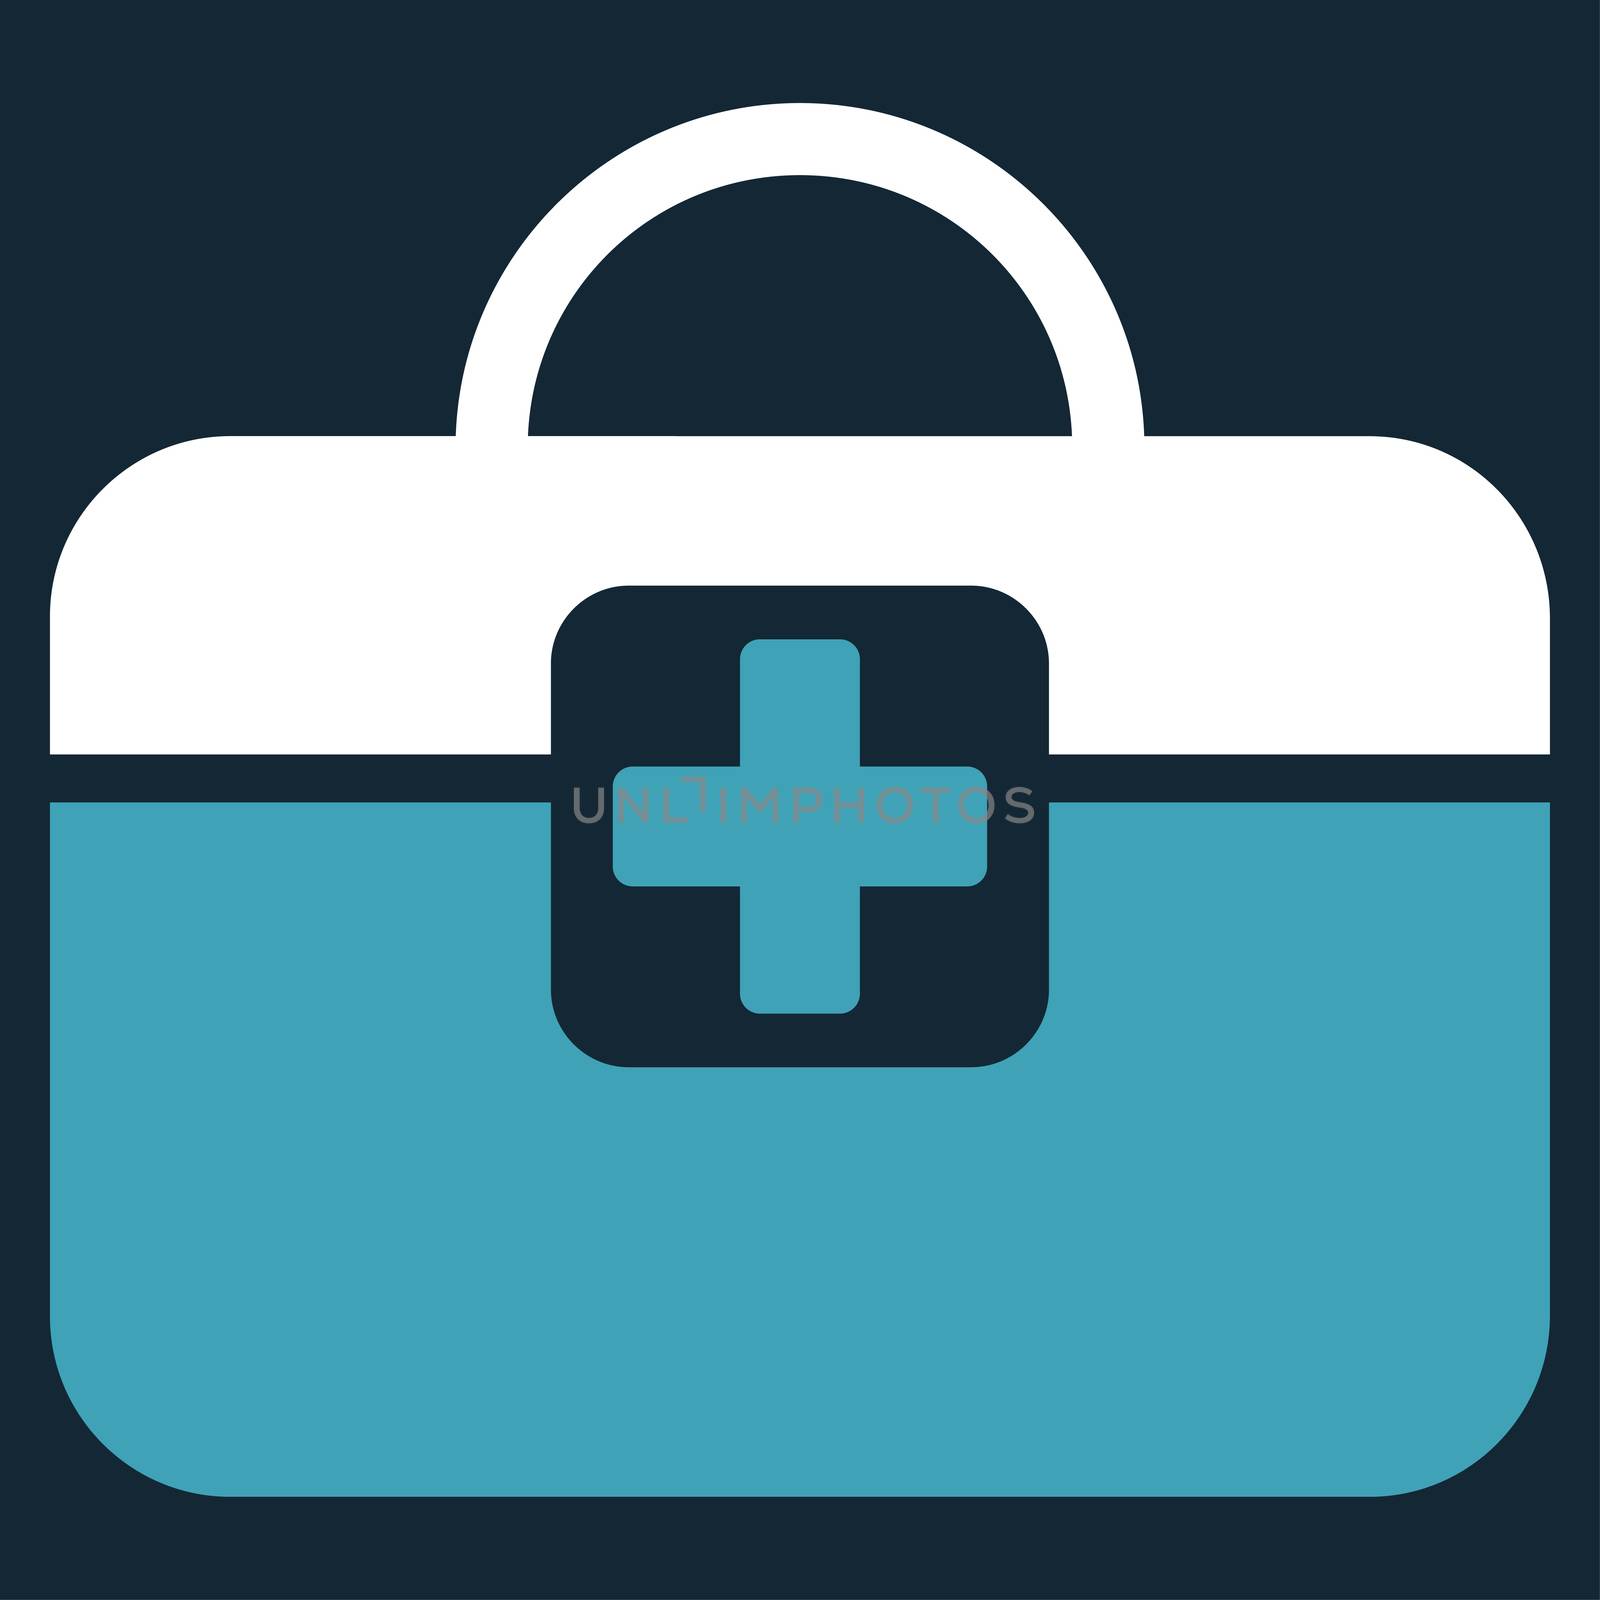 Medical Kit raster icon. Style is bicolor flat symbol, blue and white colors, rounded angles, dark blue background.